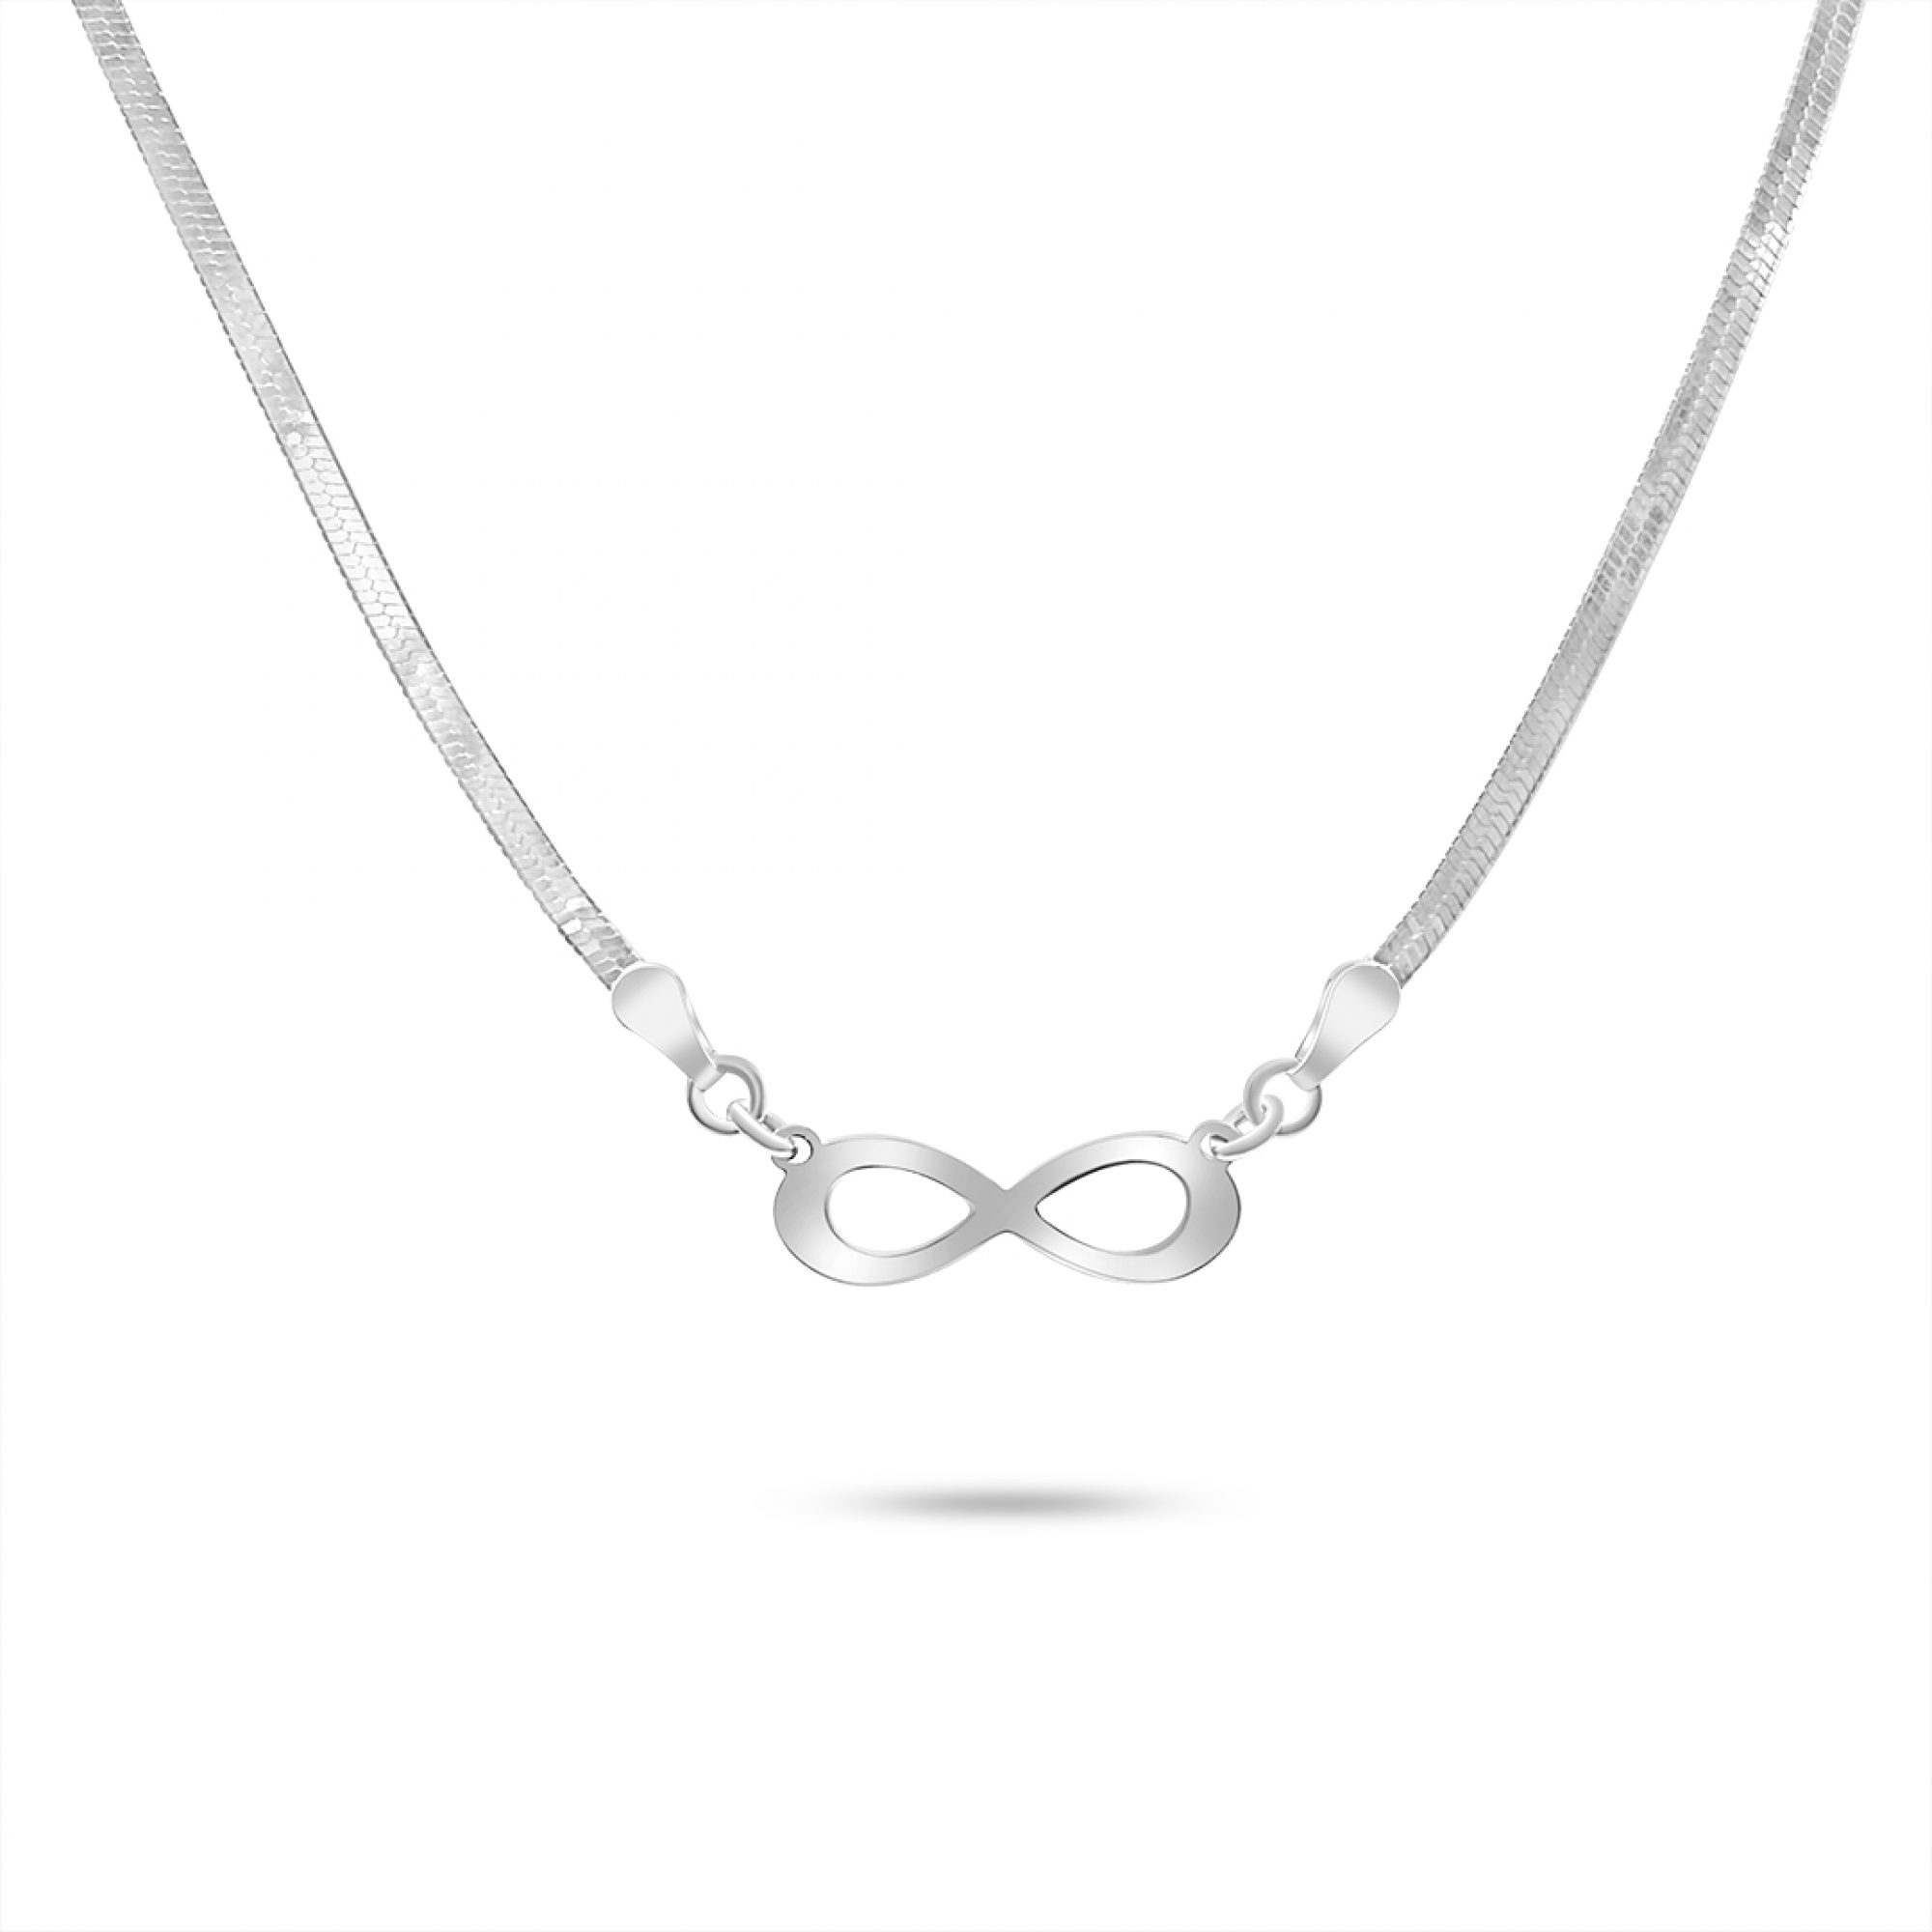 Infinity necklace 